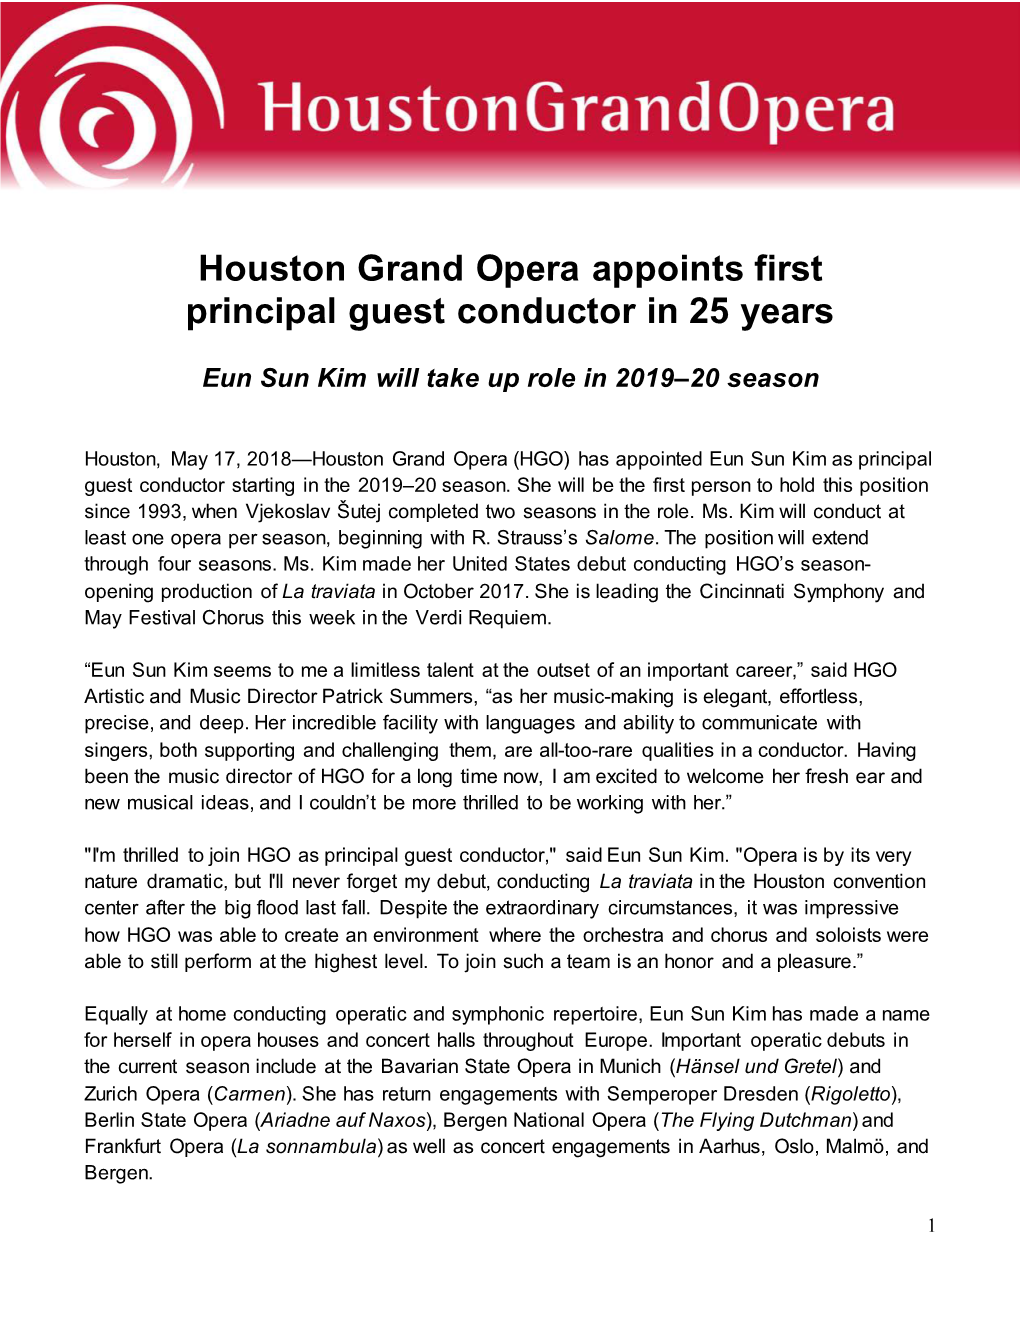 Houston Grand Opera Appoints First Principal Guest Conductor in 25 Years